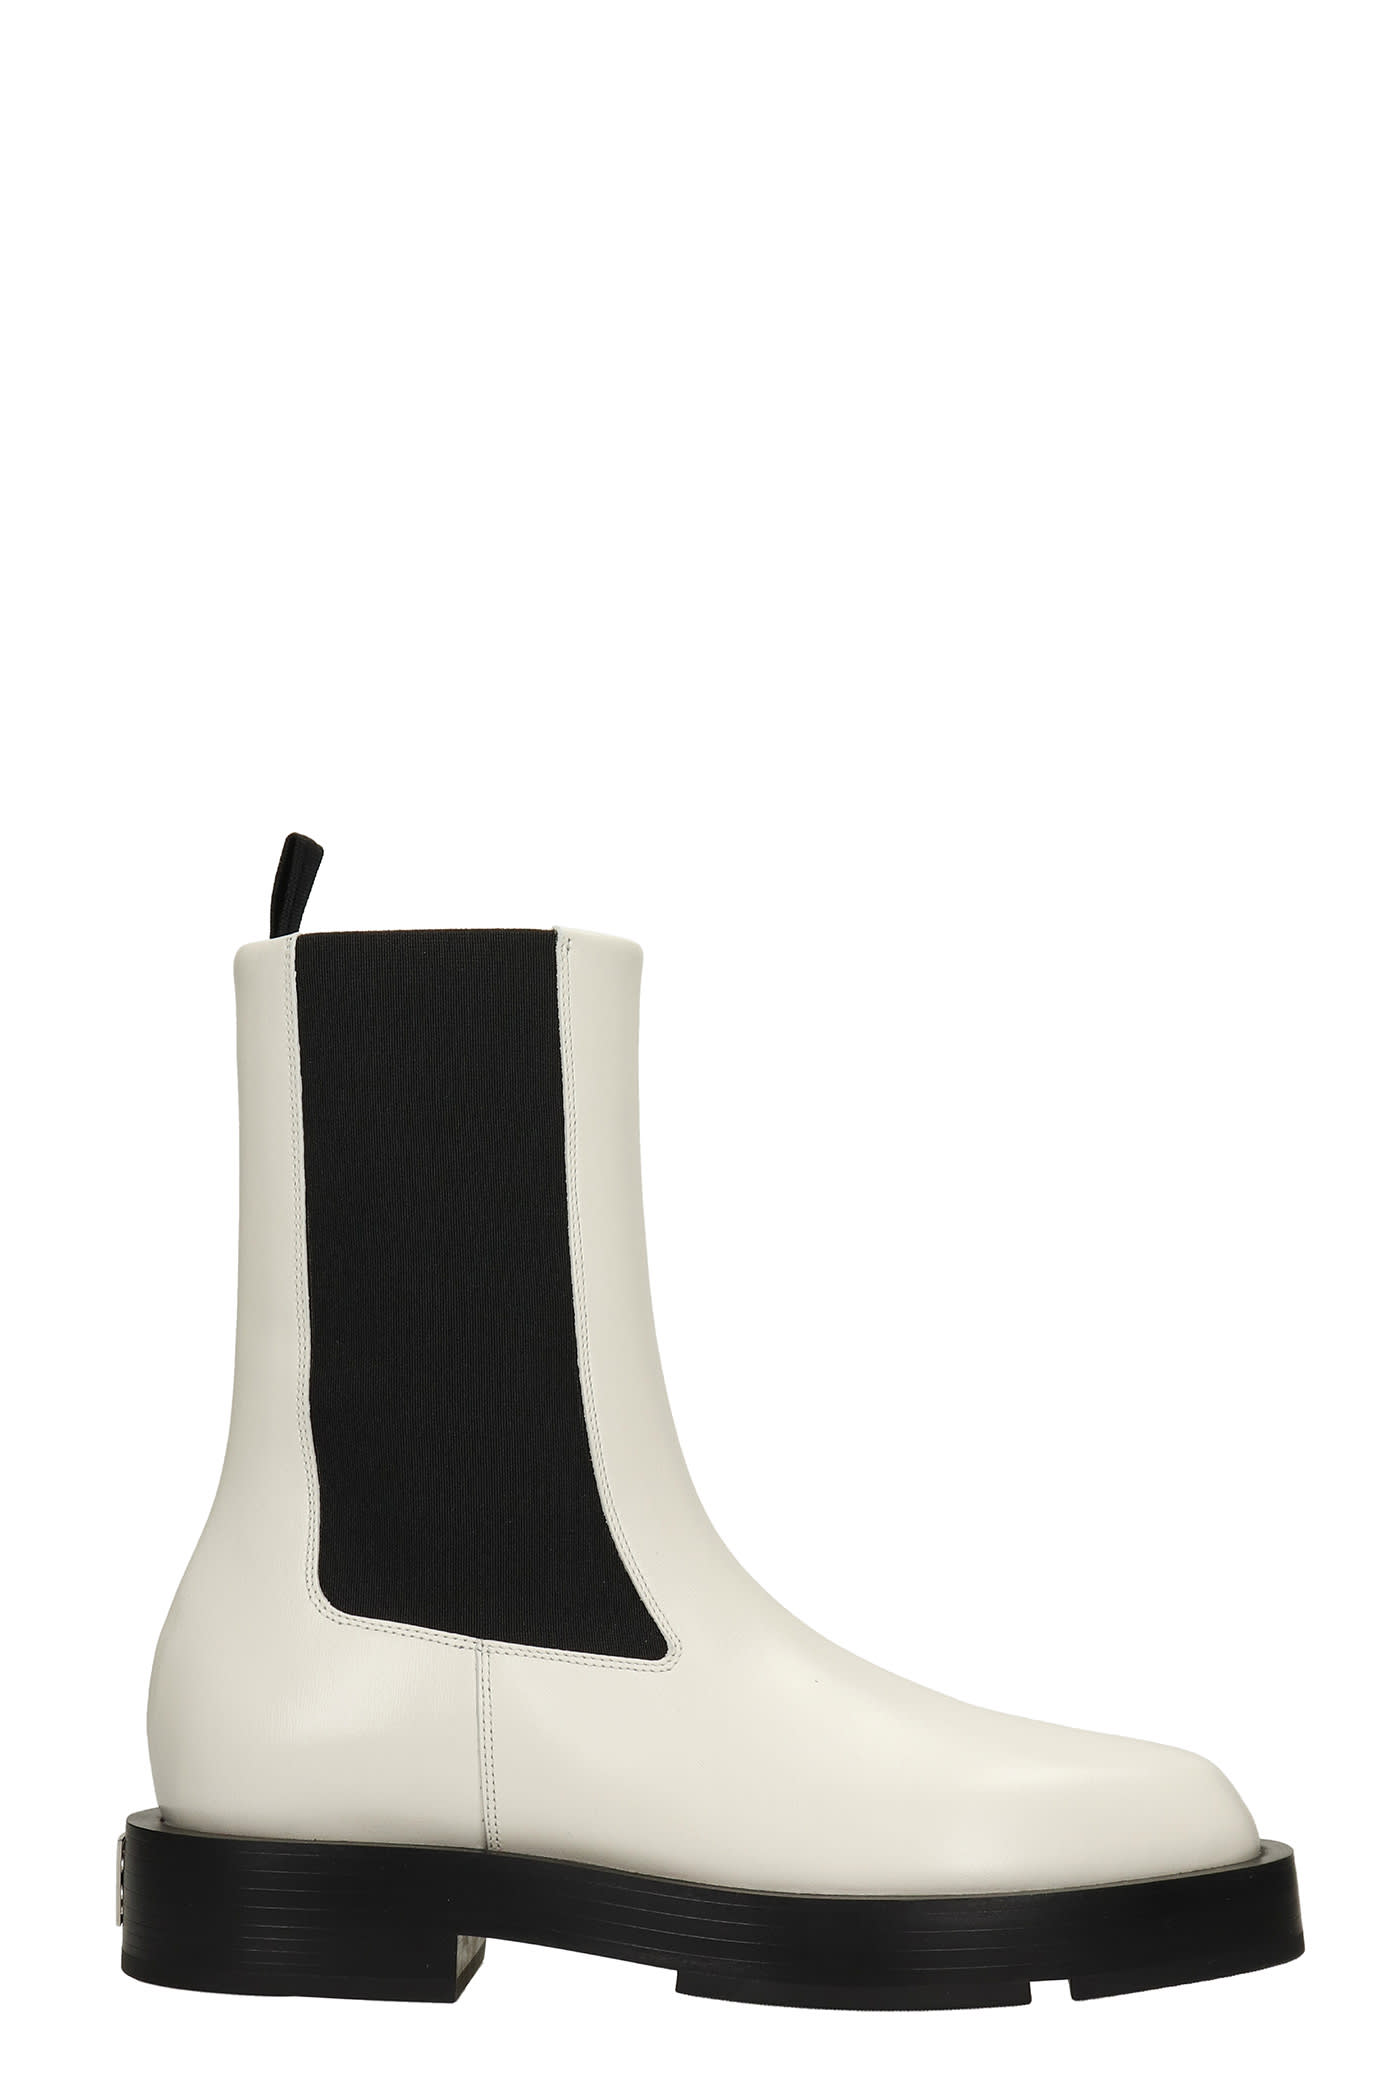 Givenchy Squared Combat Boots In White Leather